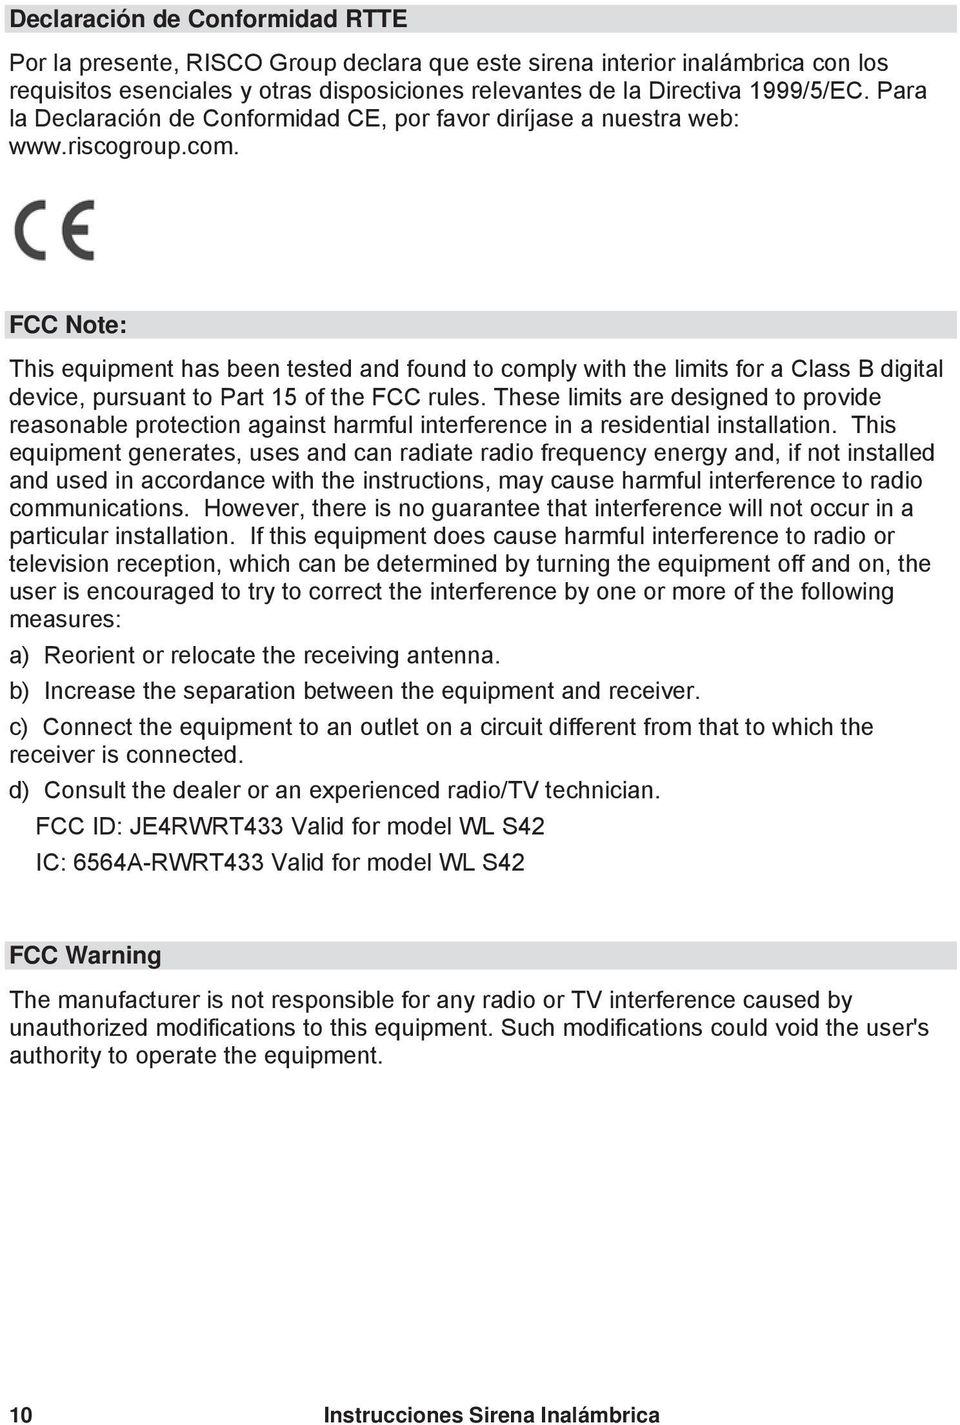 FCC Note: This equipment has been tested and found to comply with the limits for a Class B digital device, pursuant to Part 15 of the FCC rules.